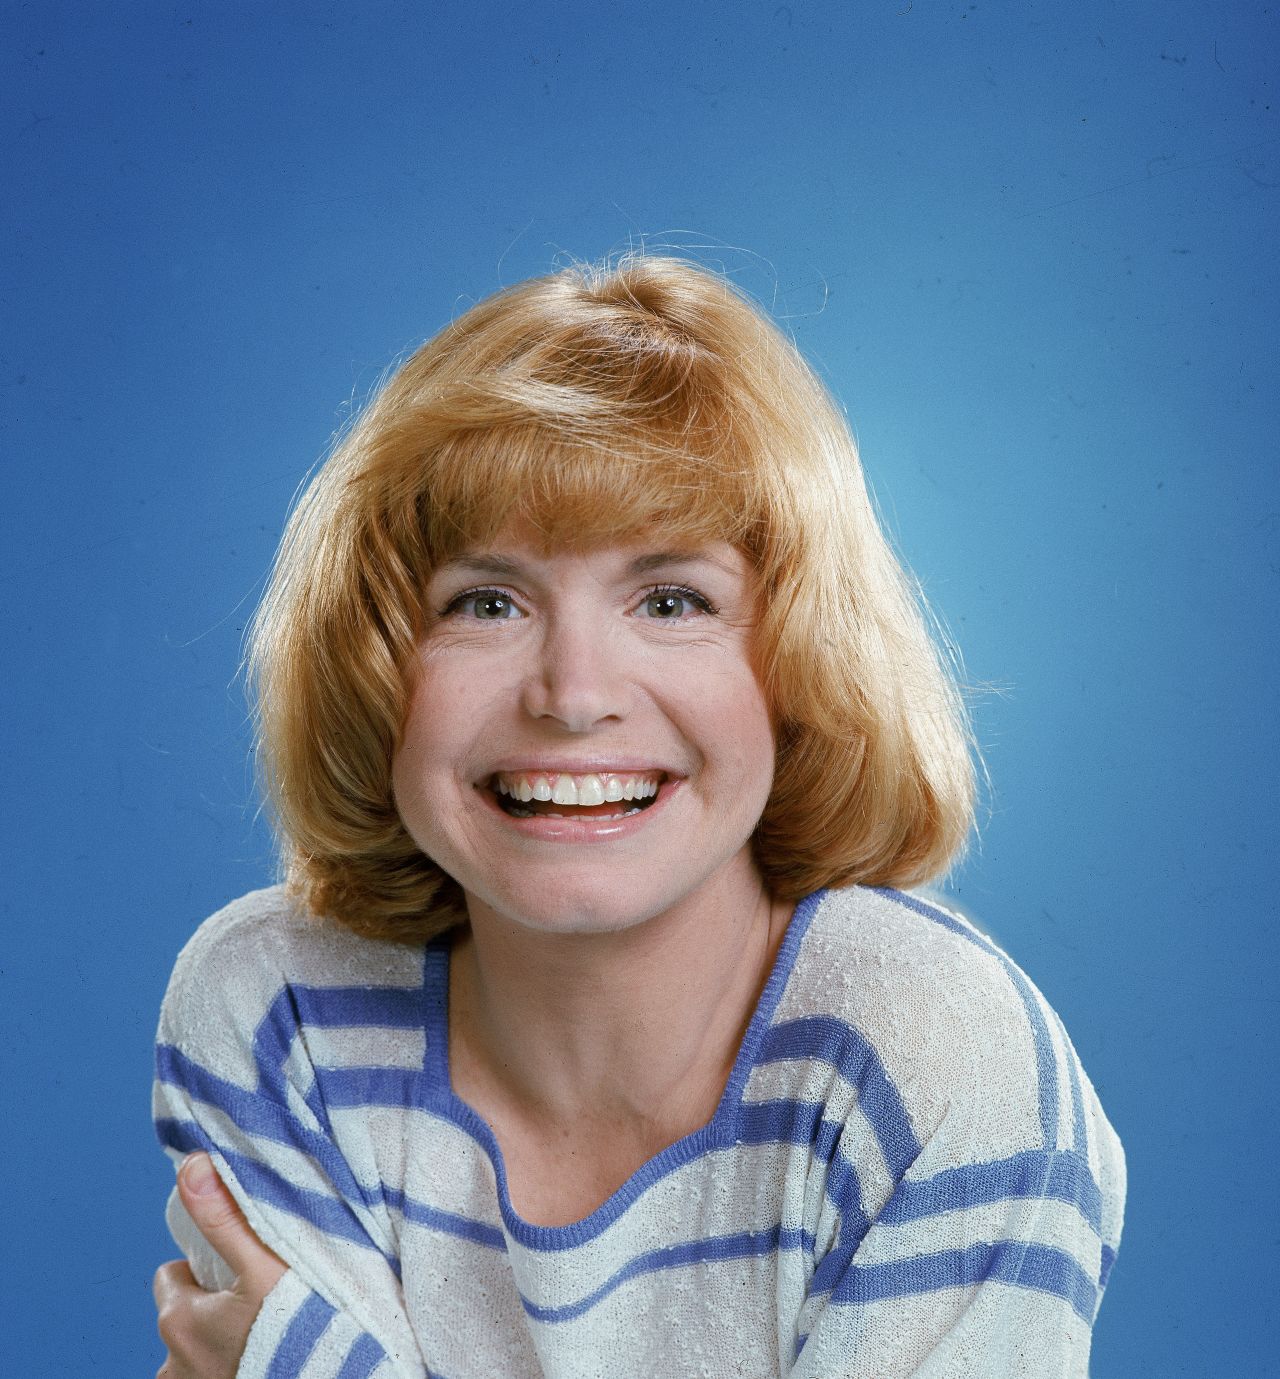 Actress <a href="http://www.cnn.com/2013/03/01/showbiz/obit-bonnie-franklin/index.html" target="_blank">Bonnie Franklin</a>, star of the TV show "One Day at a Time," died at the age of 69 on March 1 of complications from pancreatic cancer.